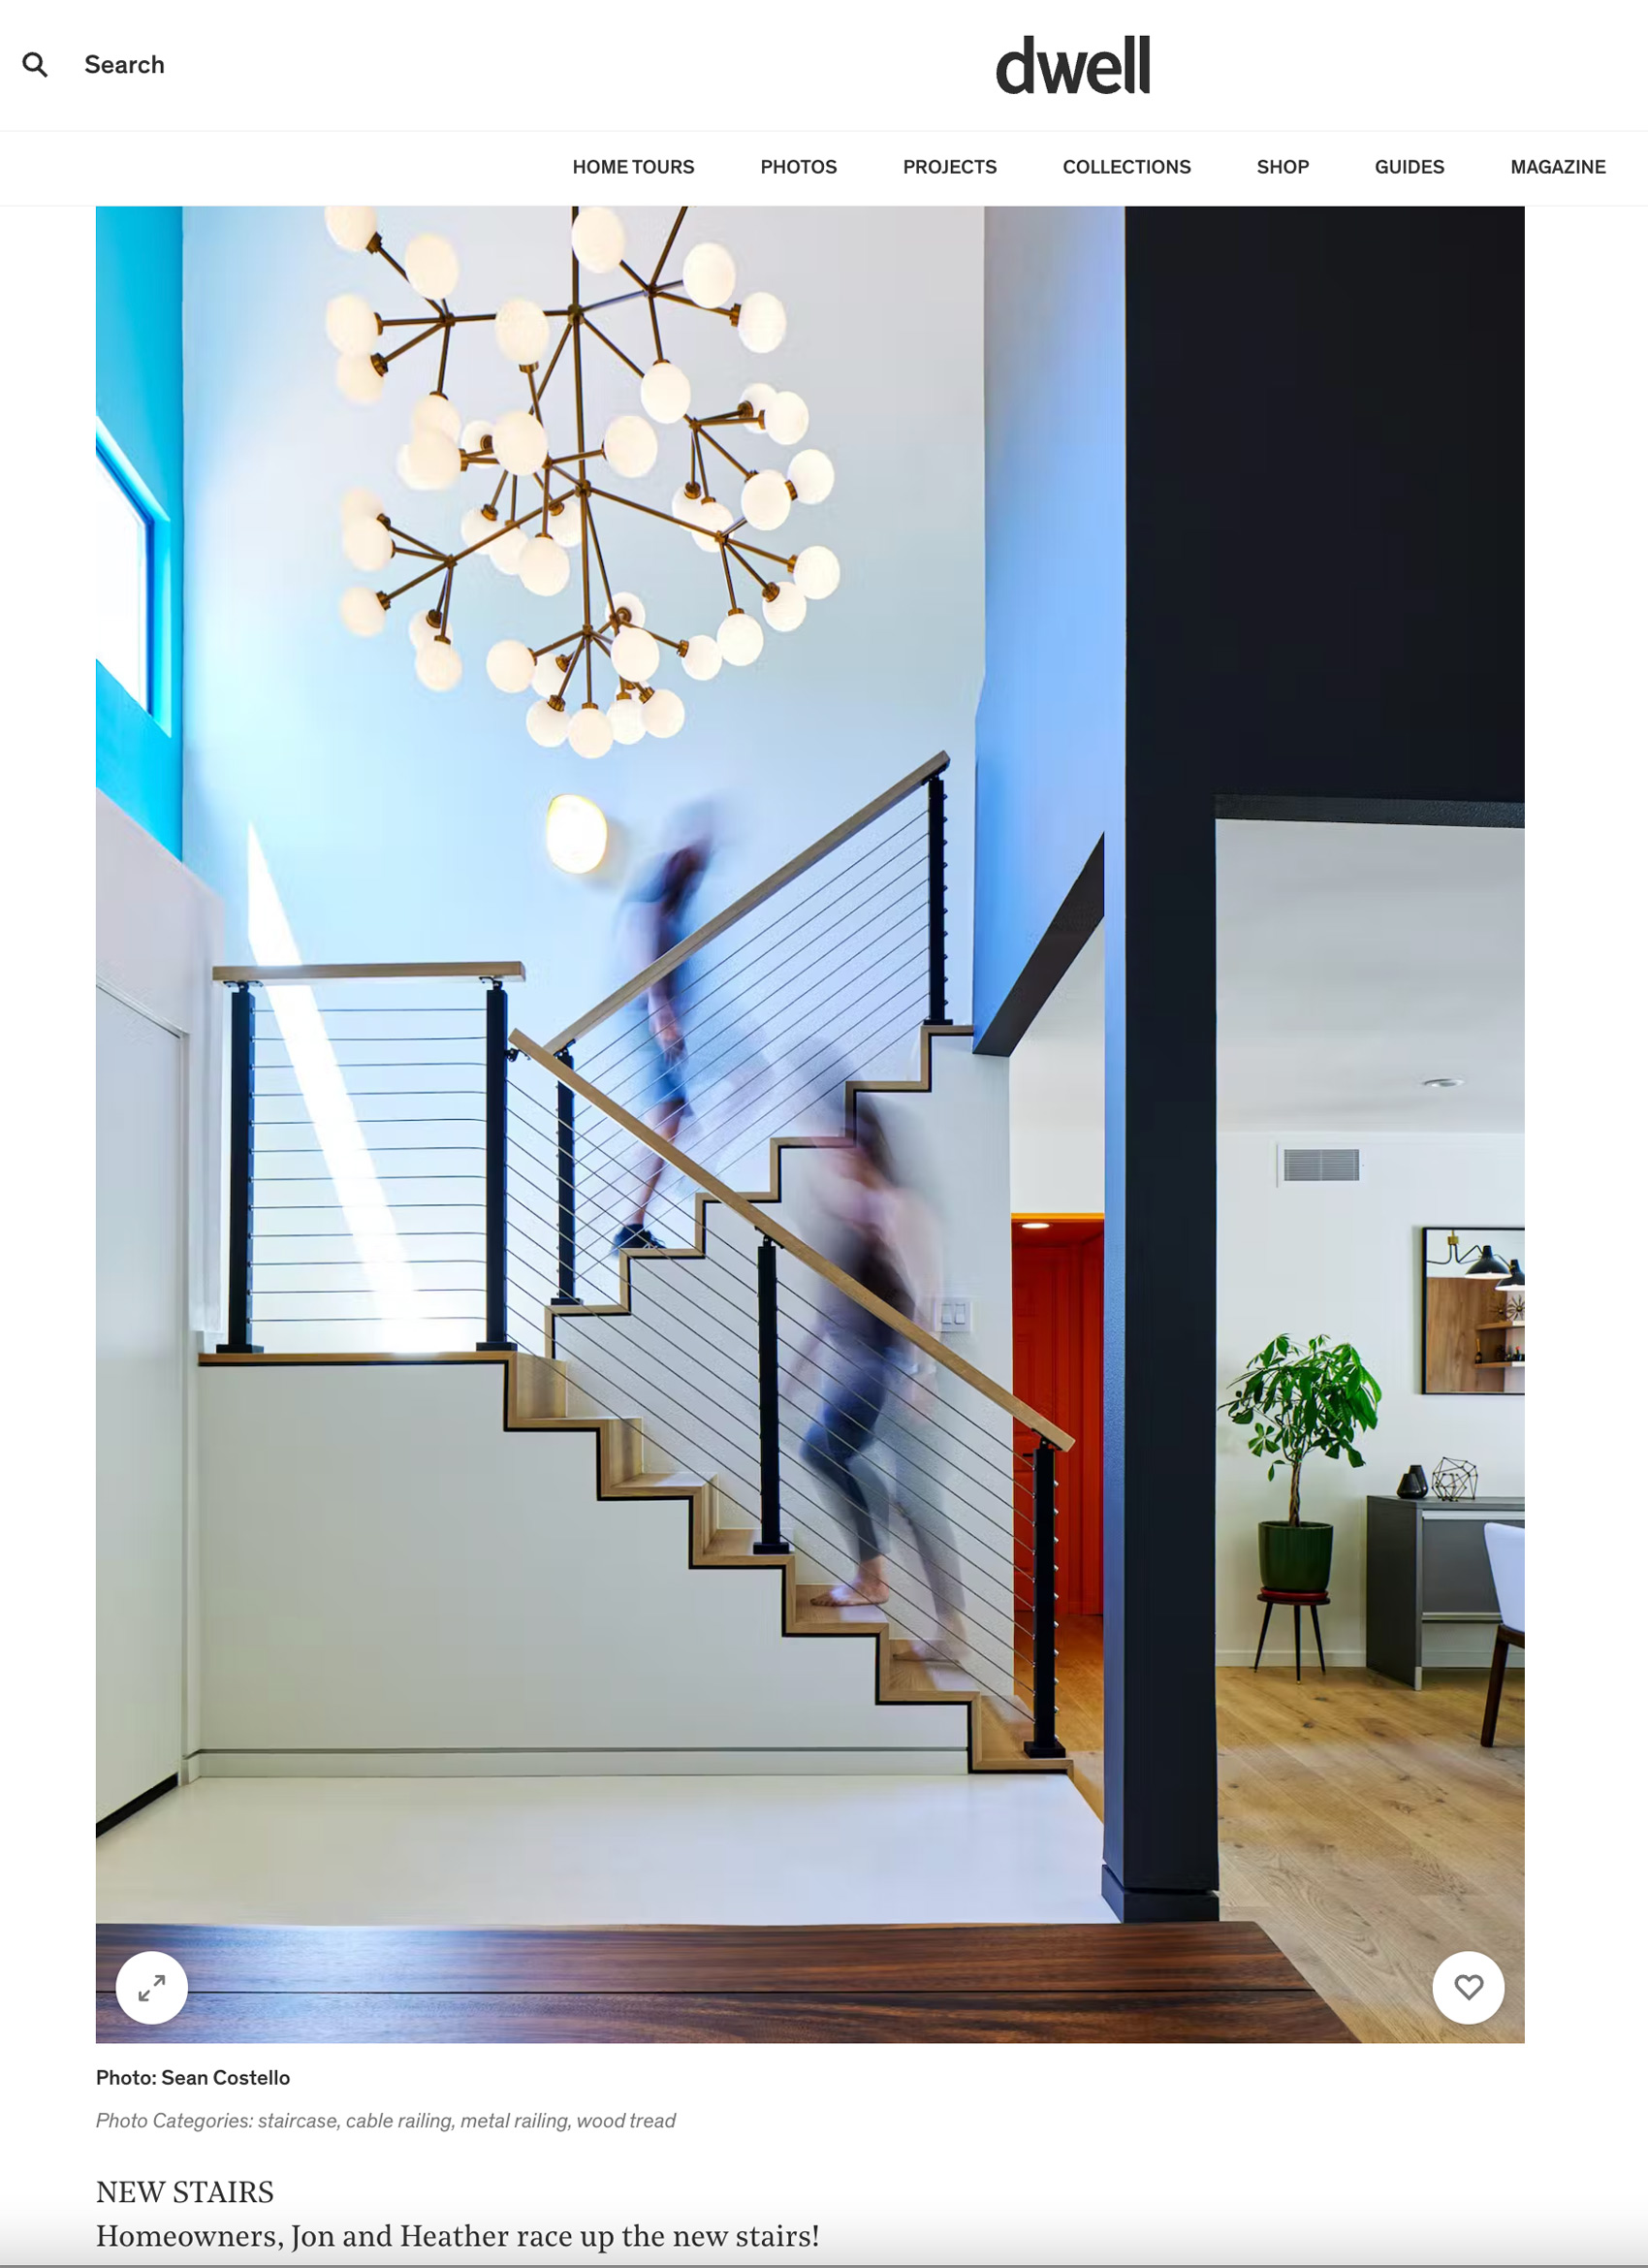 DWELL_DLZ_HOMEOWNERS_STAIRS